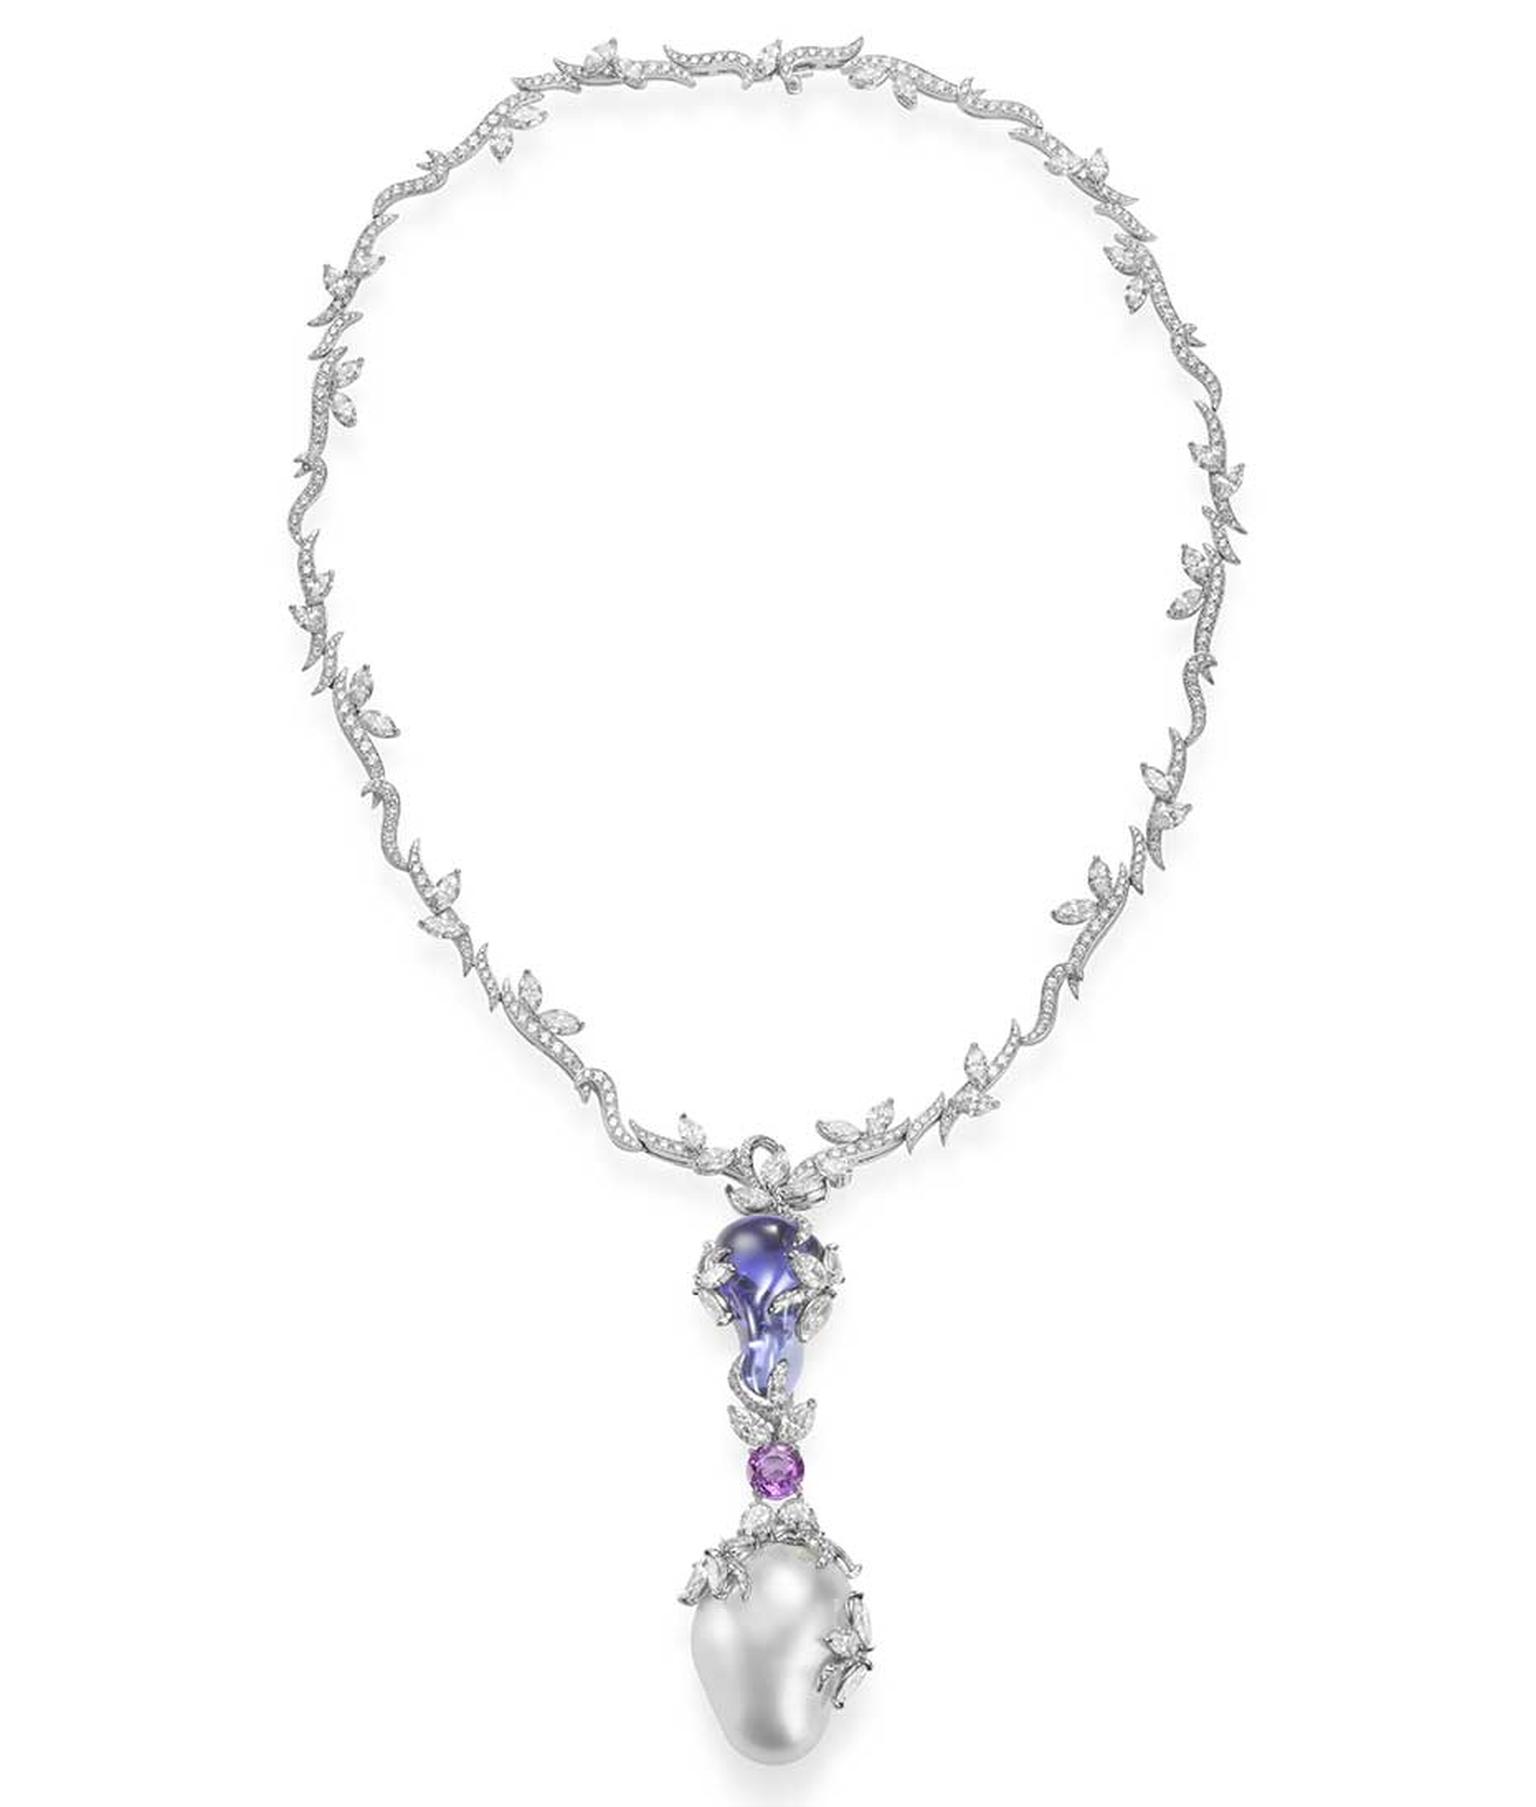 A perfectly smooth yet organically shaped drop, referred to as tumbled tanzanite, complements the wild beauty of a 22mm baroque South Sea pearl in this Mikimoto Hyacinthia necklace.